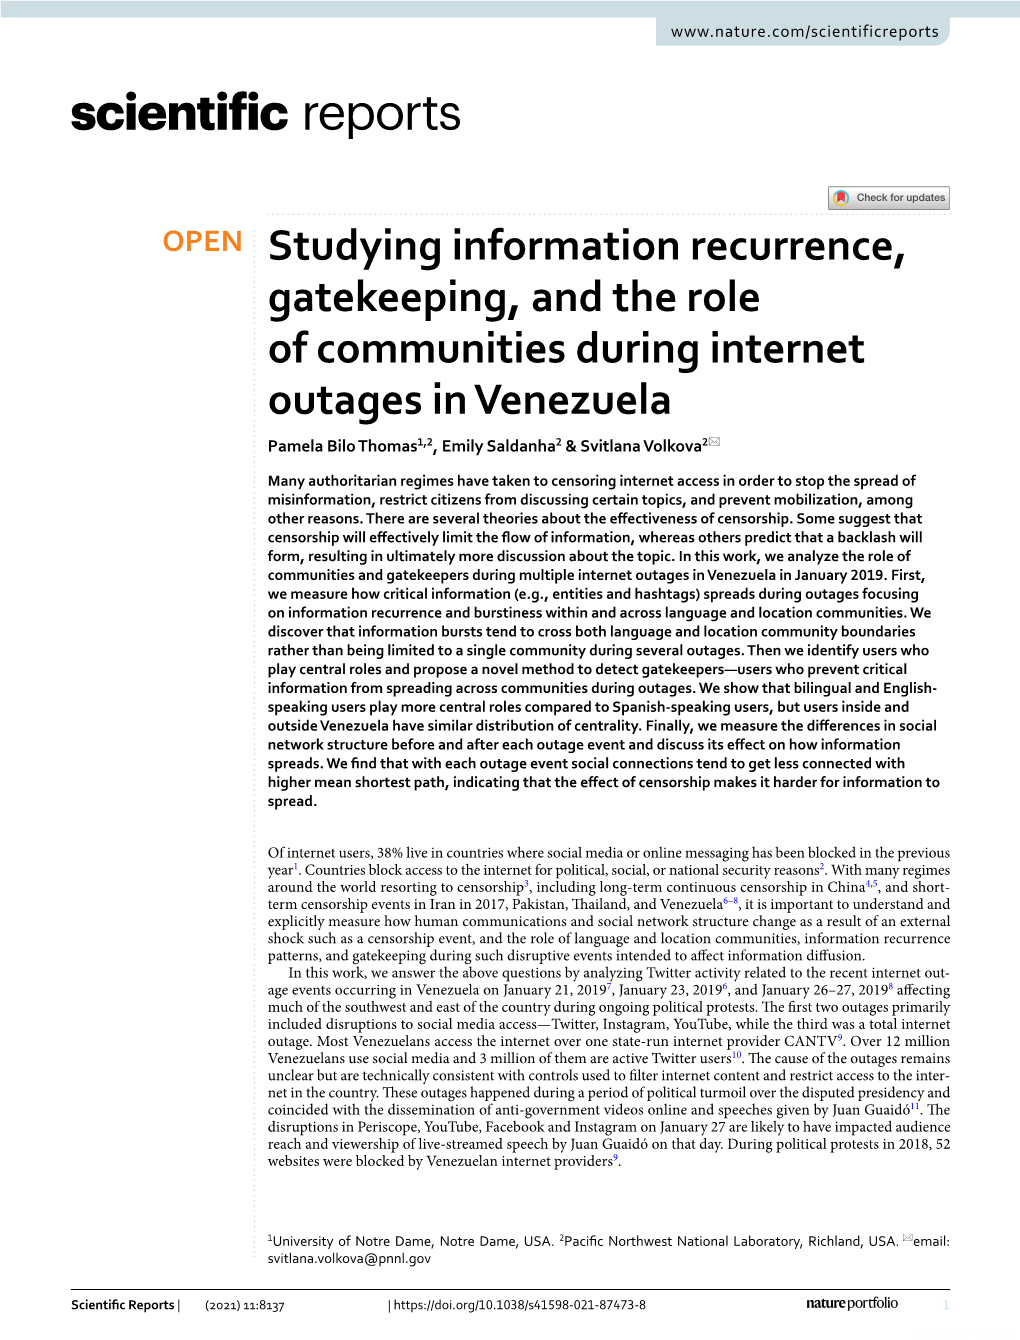 Studying Information Recurrence, Gatekeeping, and the Role Of